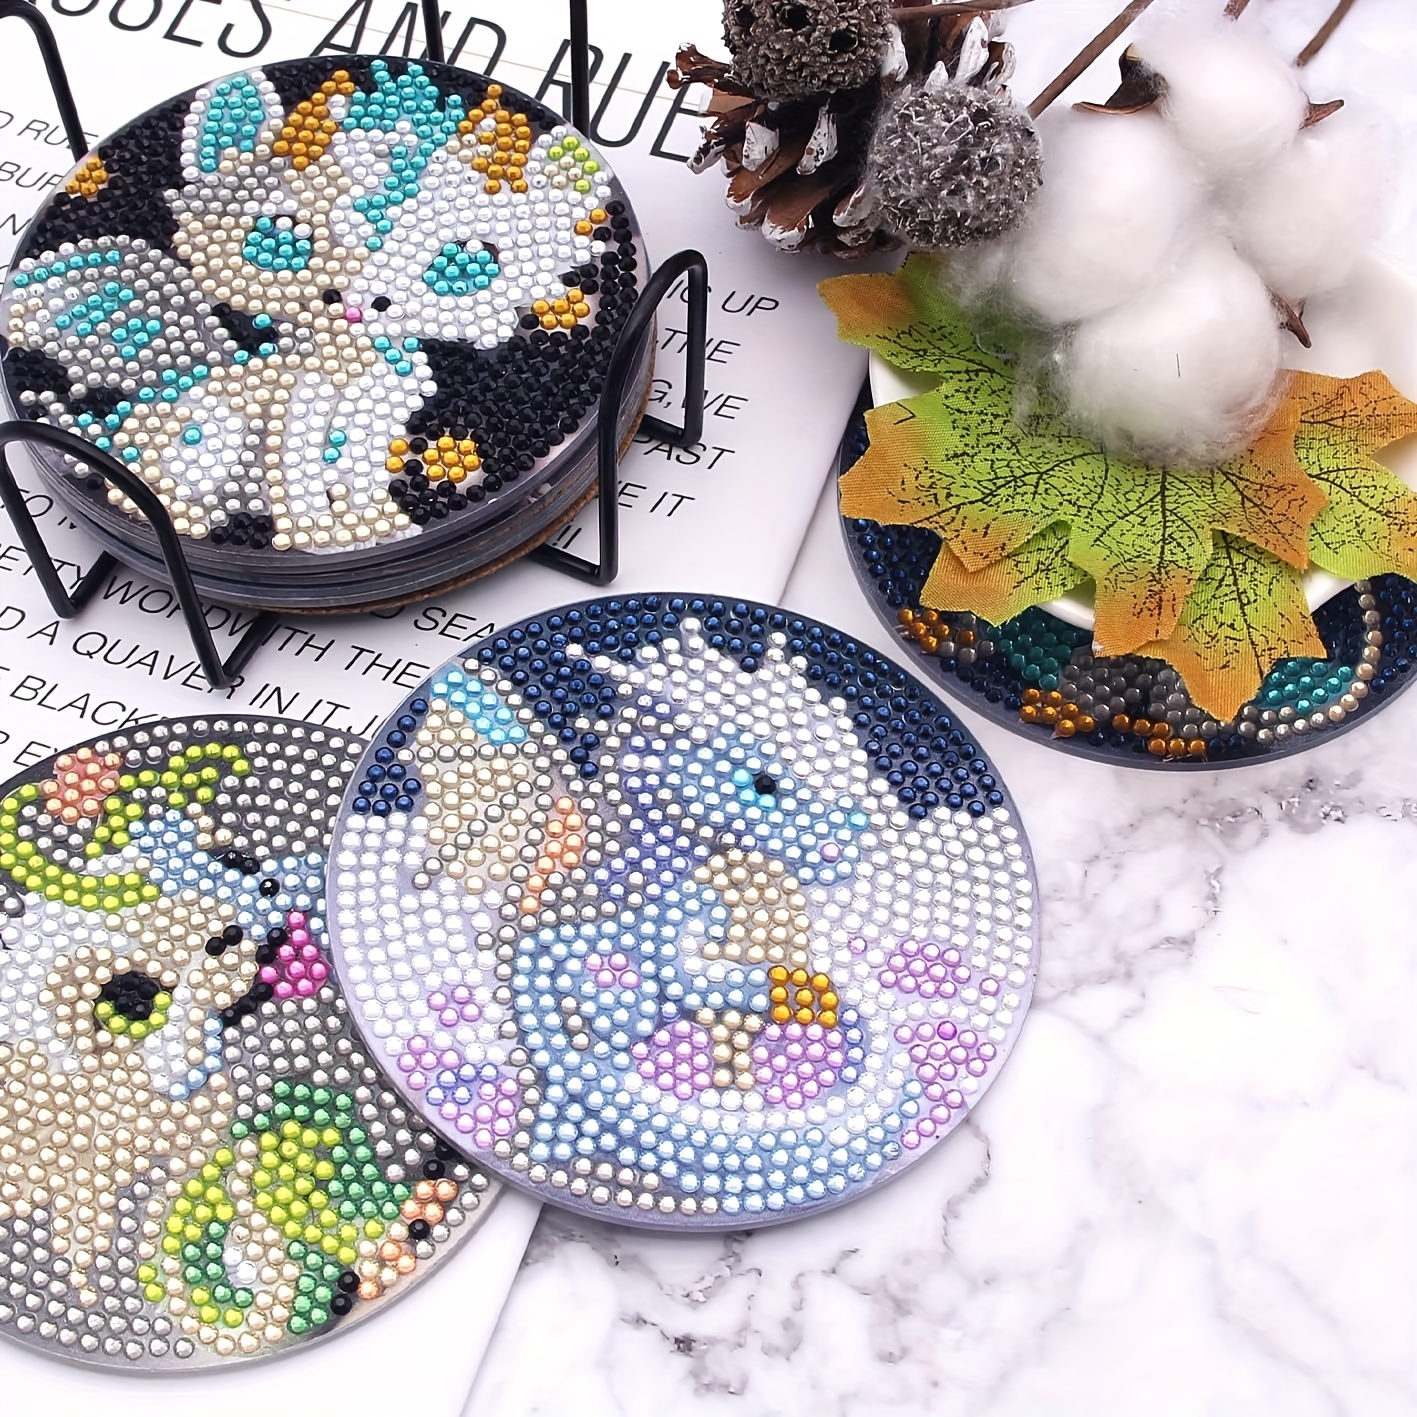  8 Pcs Diamond Painting Coasters, Diamond Art Coasters, Ocean  Coasters for Drinks with Holder, Diamond Painting Kits for Adults, DIY  Diamond Dots Art Craft christmas gifts Kit for Beginners & Kids 